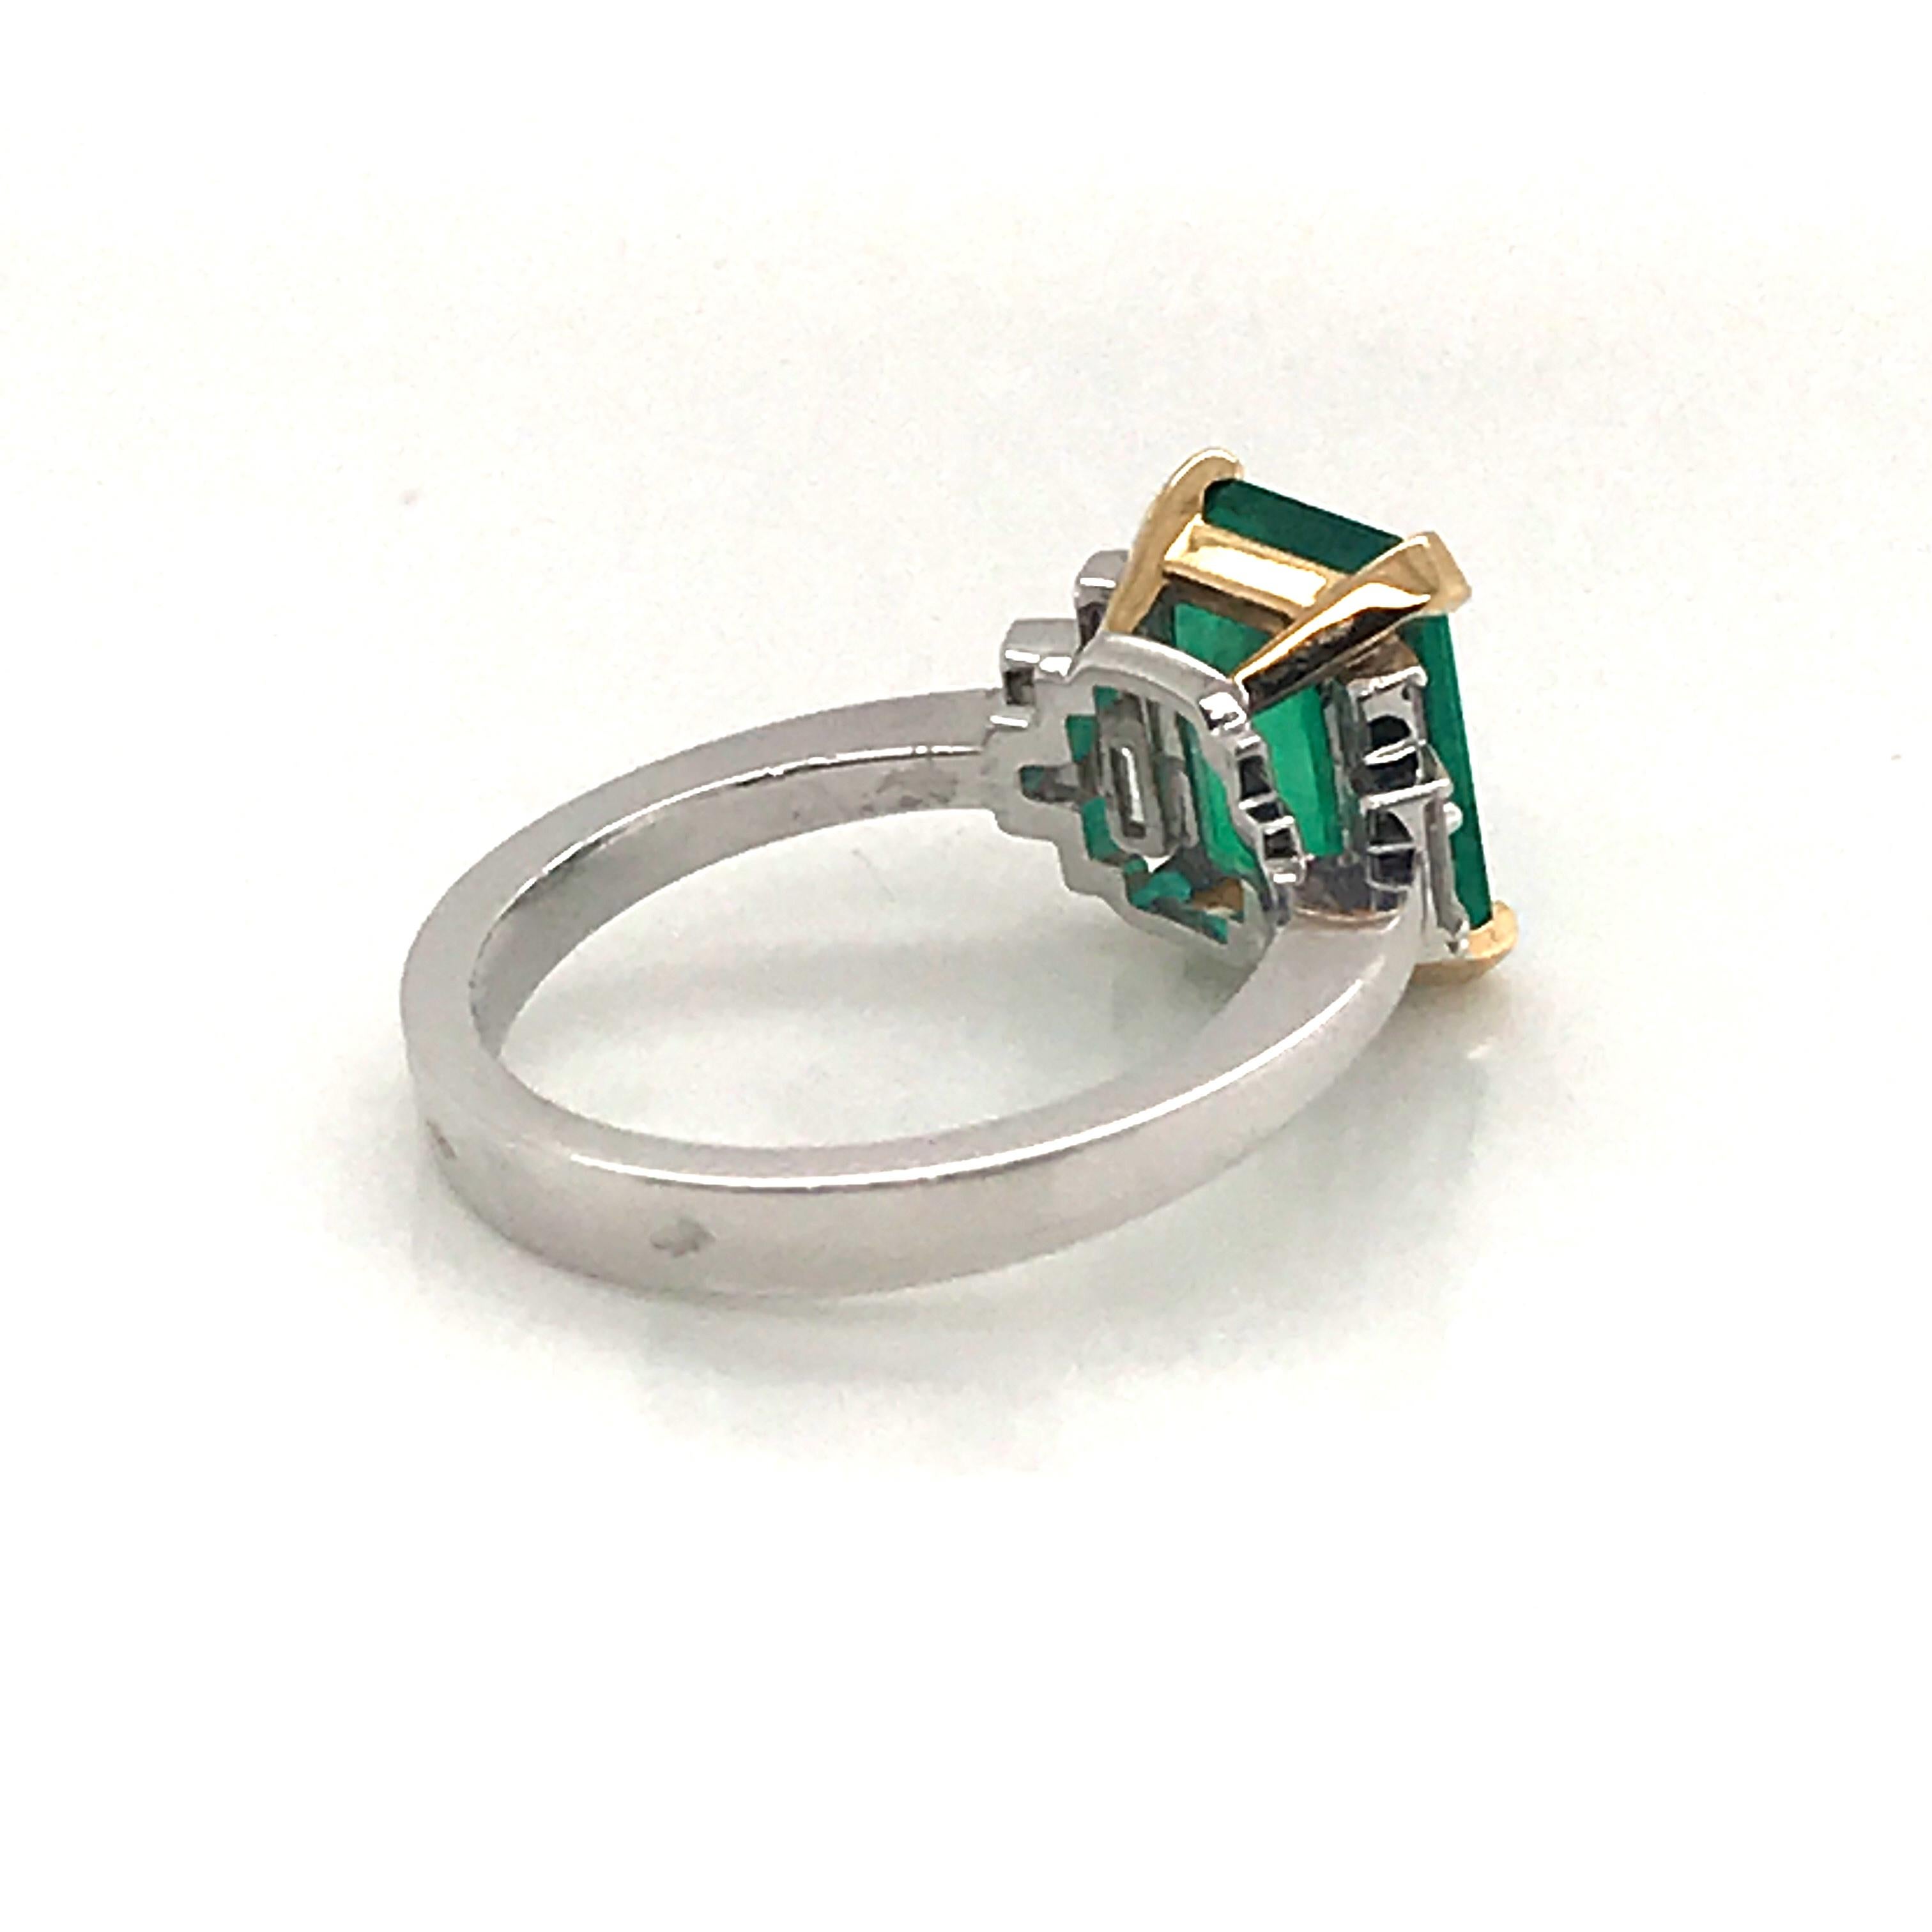 Certified Emerald 2.68 Karat White Diamonds on with Gold Engagement Ring 8